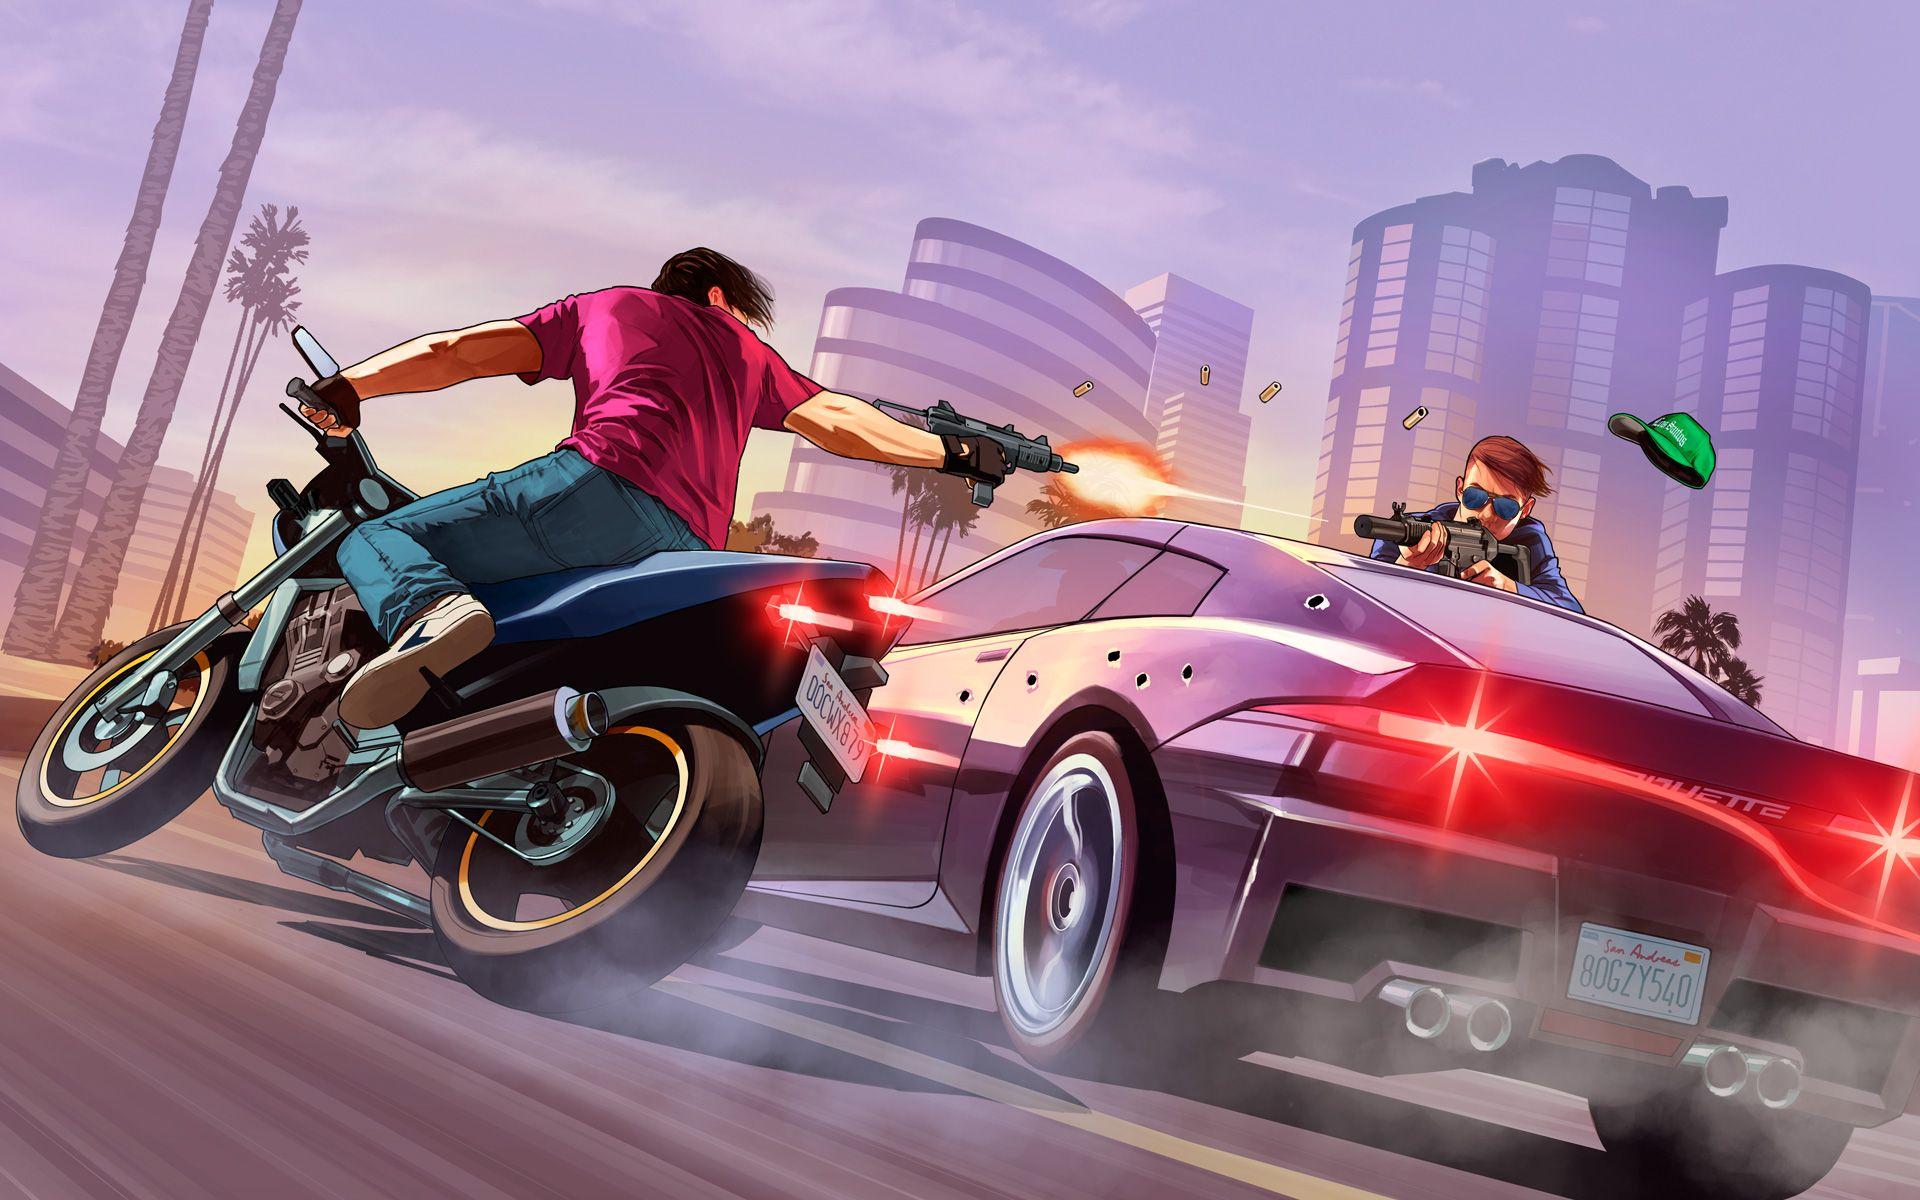 Gta Vice City Wallpapers Free Download - Colaboratory